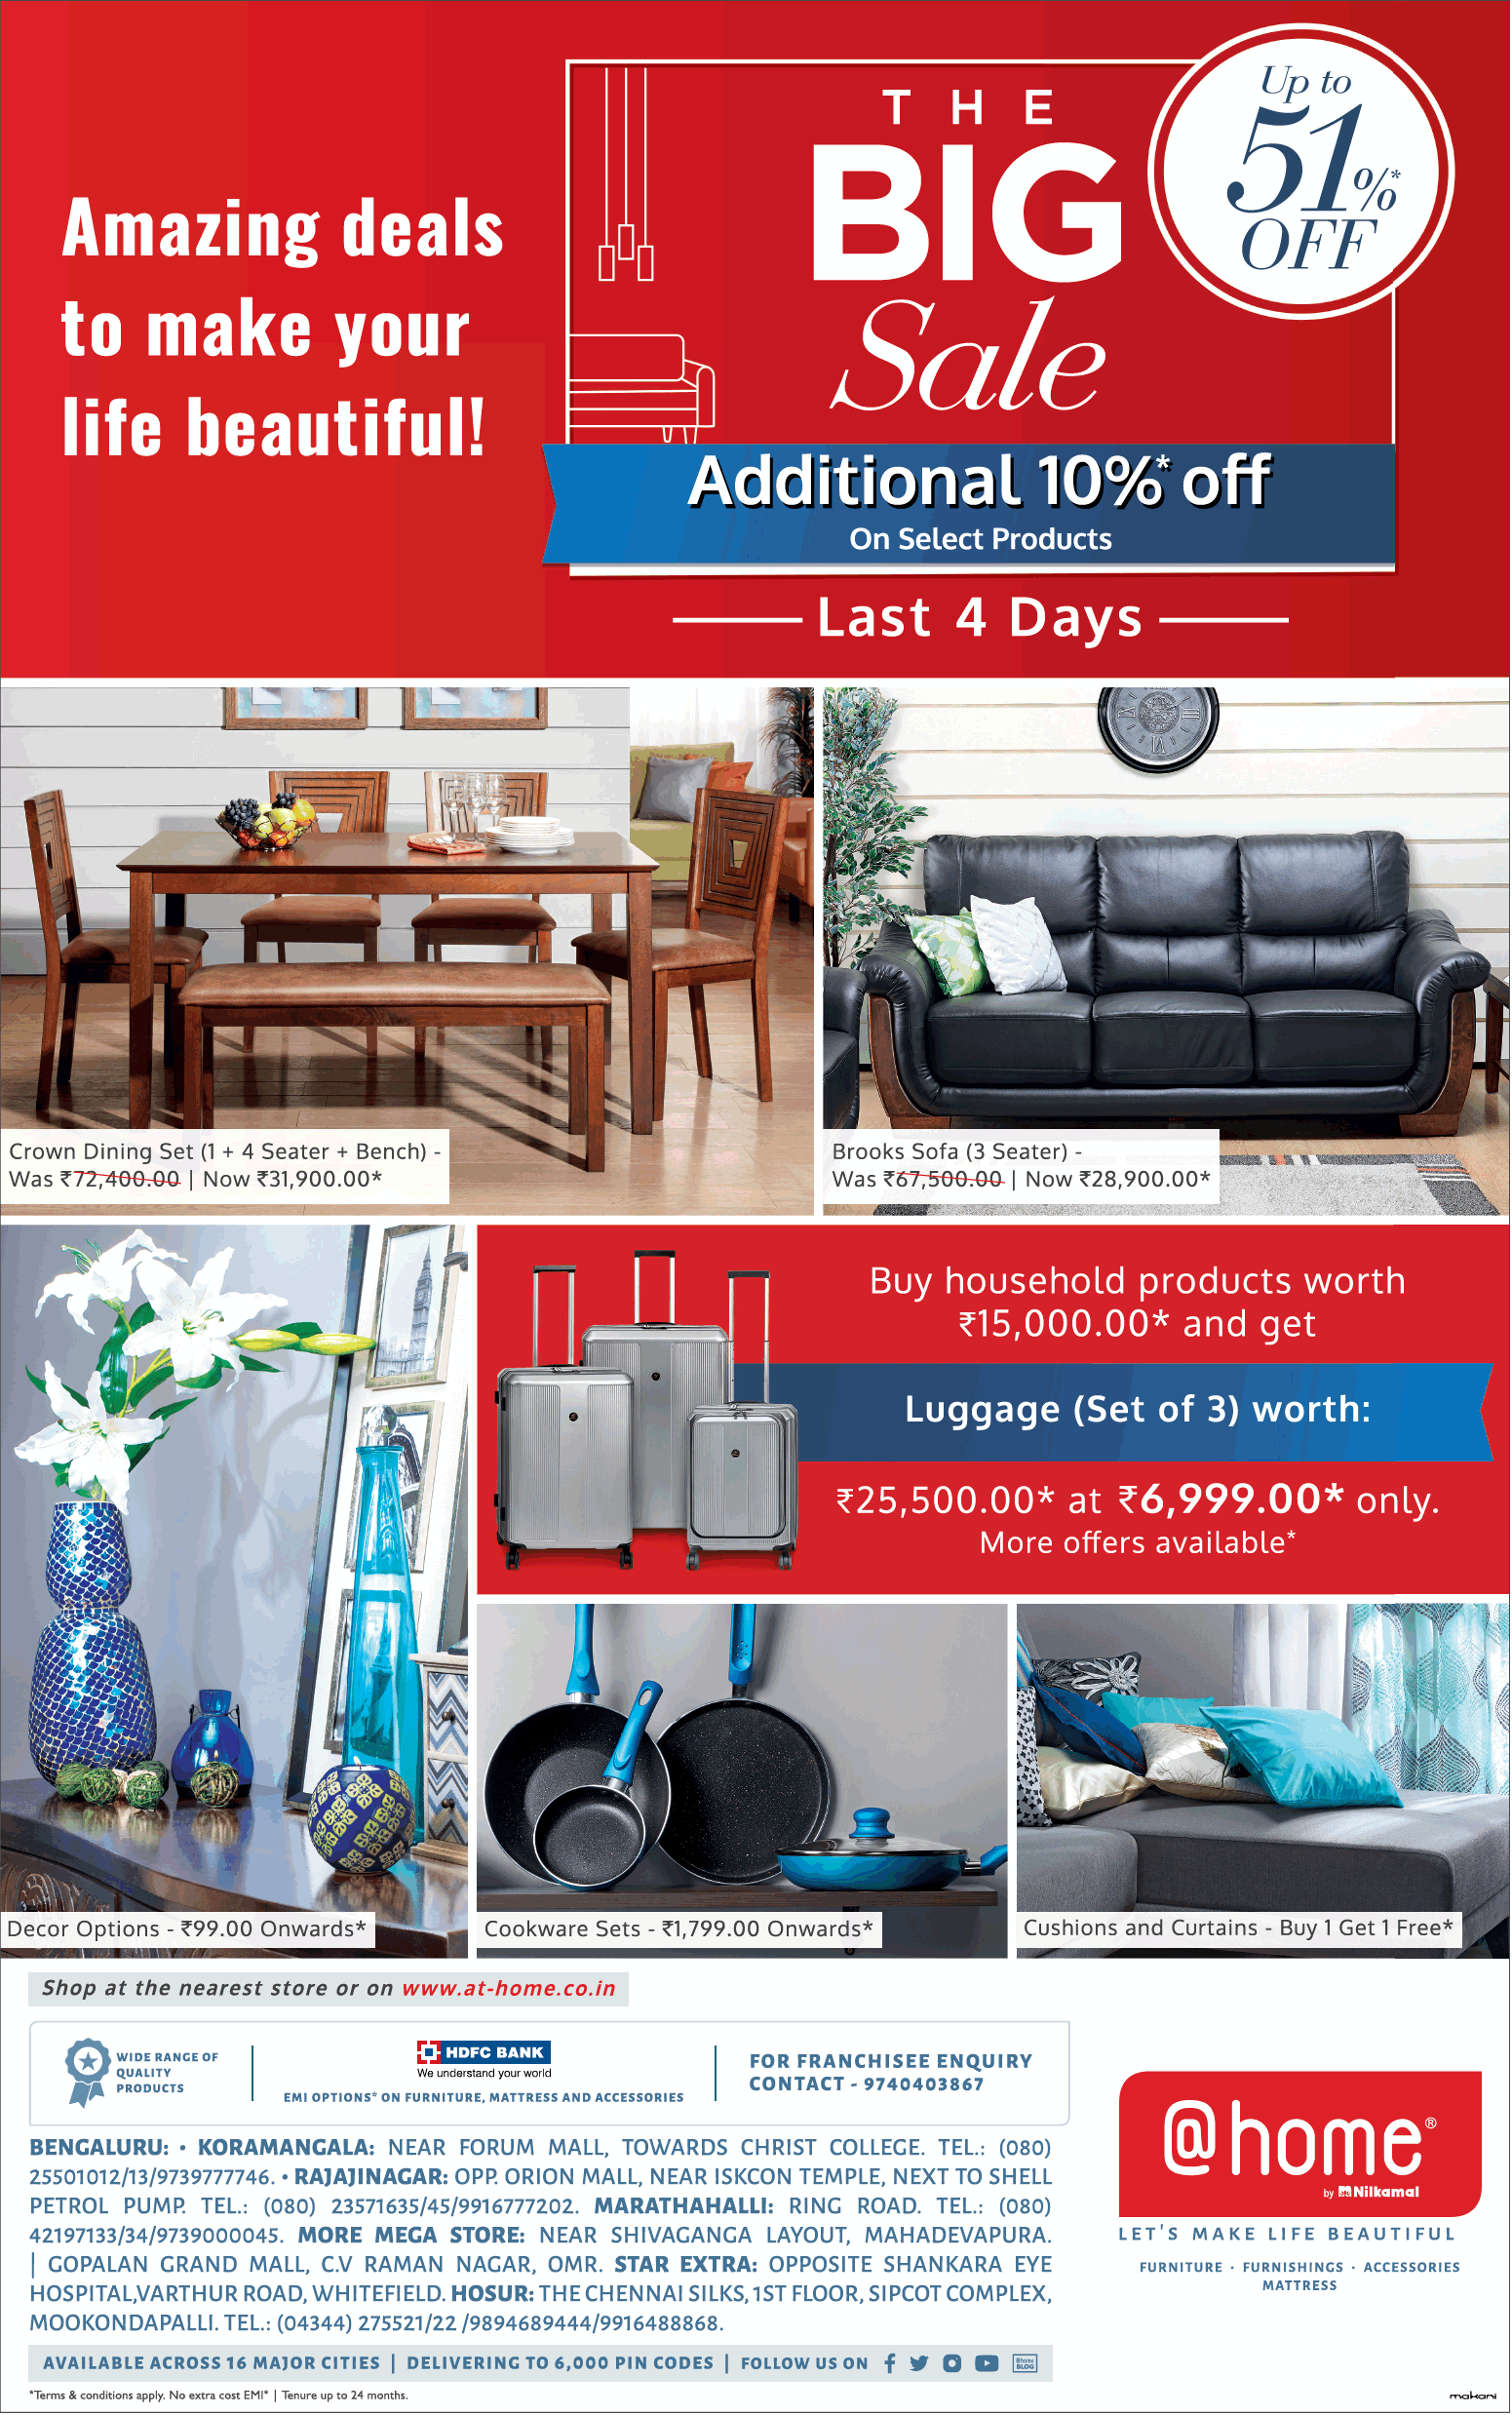 at-home-furniture-the-big-sale-additional-10%-off-ad-bangalore-times-19-07-2019.png